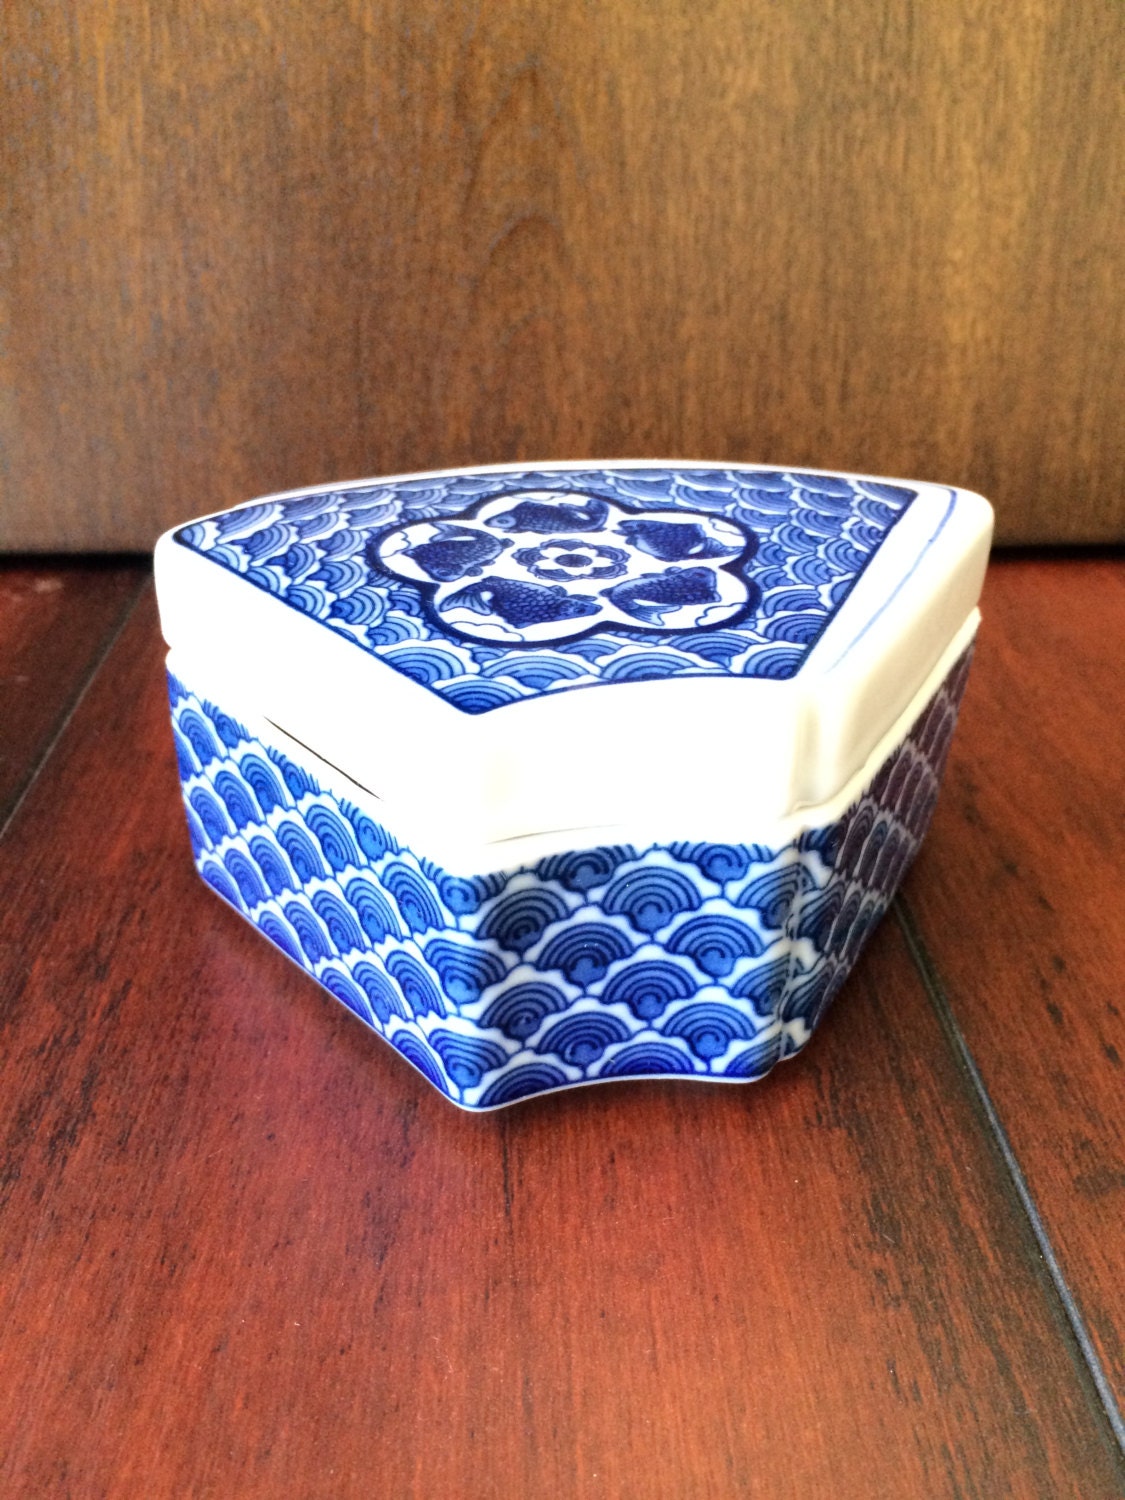 Blue and White Porcelain Box, Ceramic by Mann, Cerammic Box With Fish, “Blue Wave” by mann